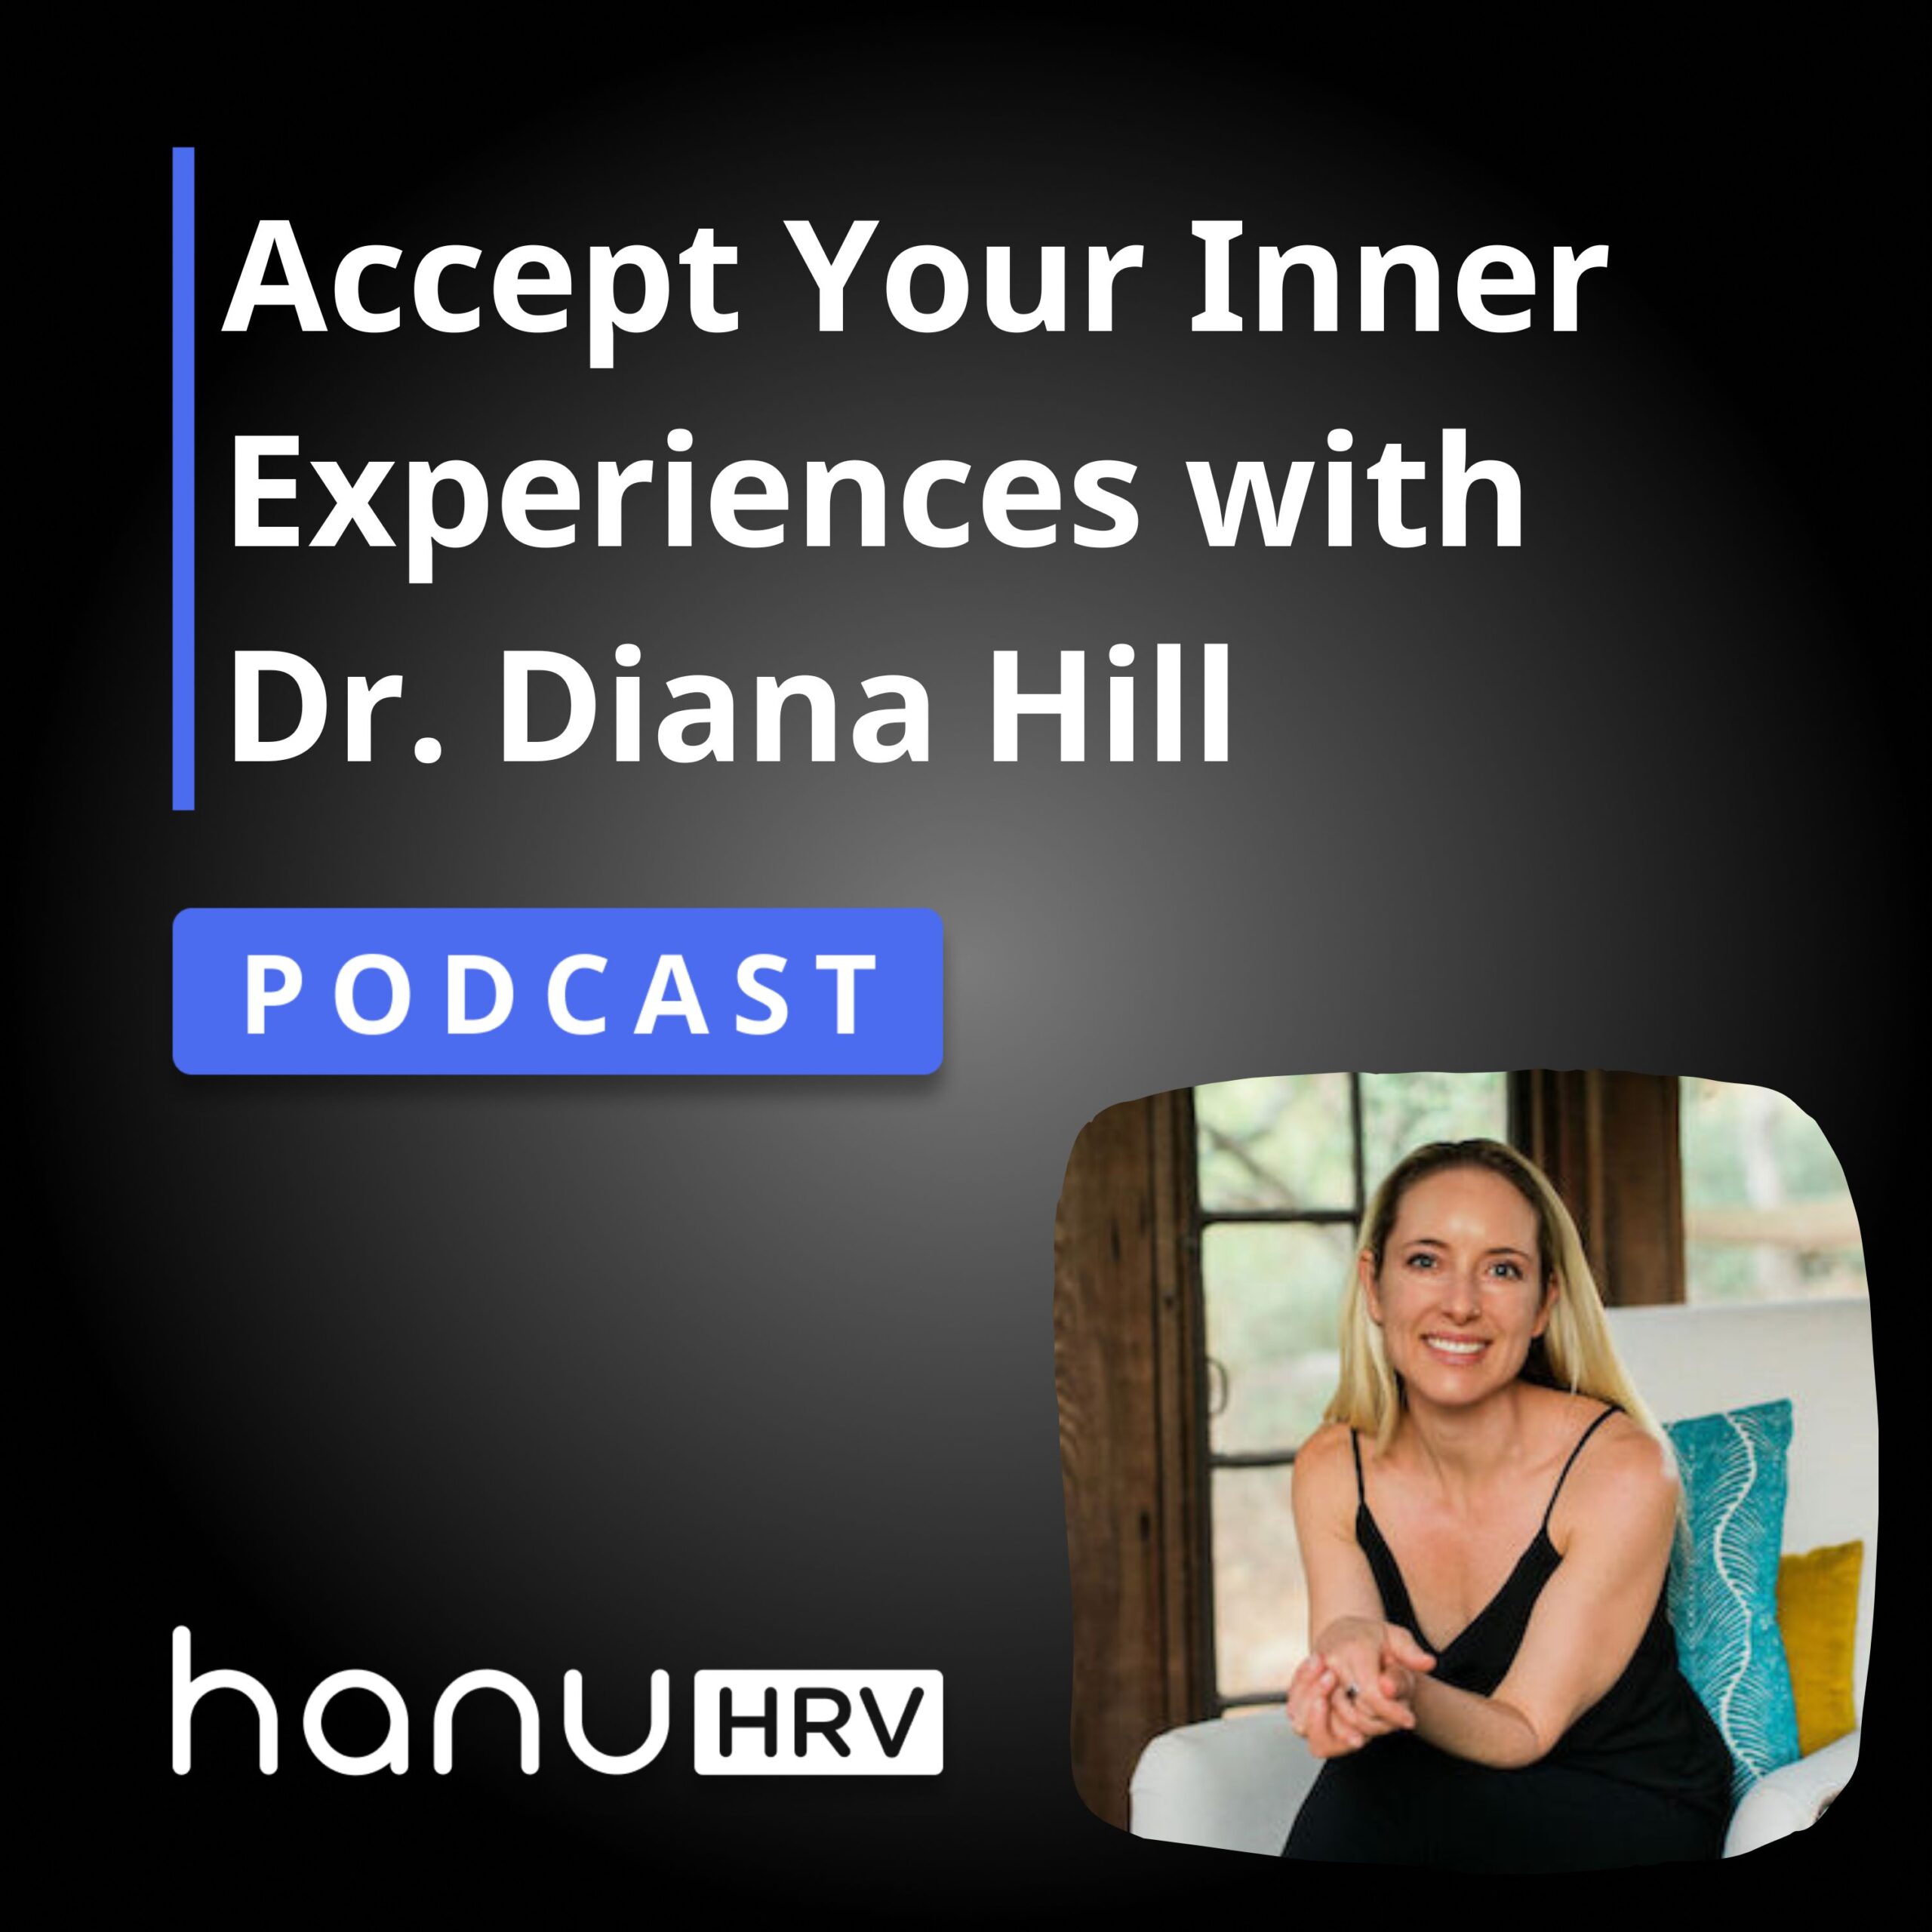 Accept Your Inner Experiences with Dr. Diana Hill